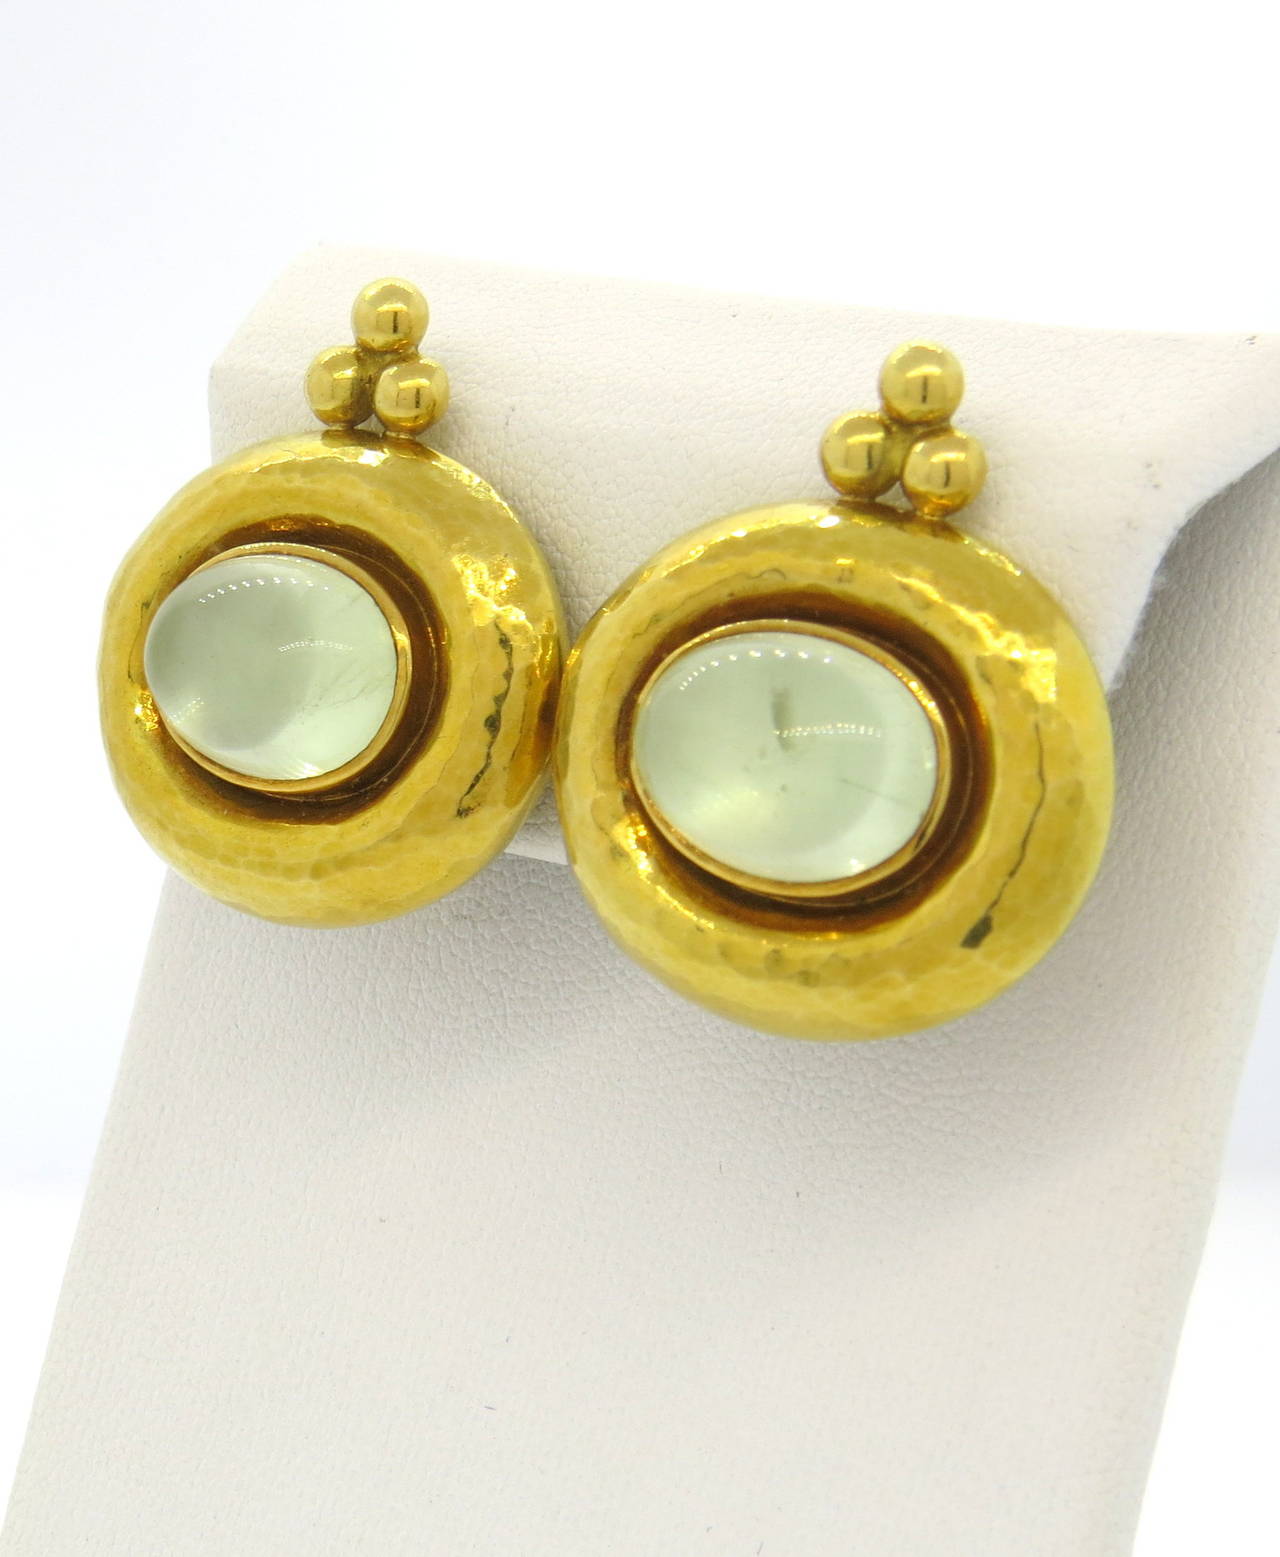 A pair of 18k yellow gold earrings set with moonstone cabochons (14mm x 10mm) backed with mother of pearl.  Crafted by Elizabeth Gage, the earrings measure 30mm x 27mm and weigh 28.9 grams